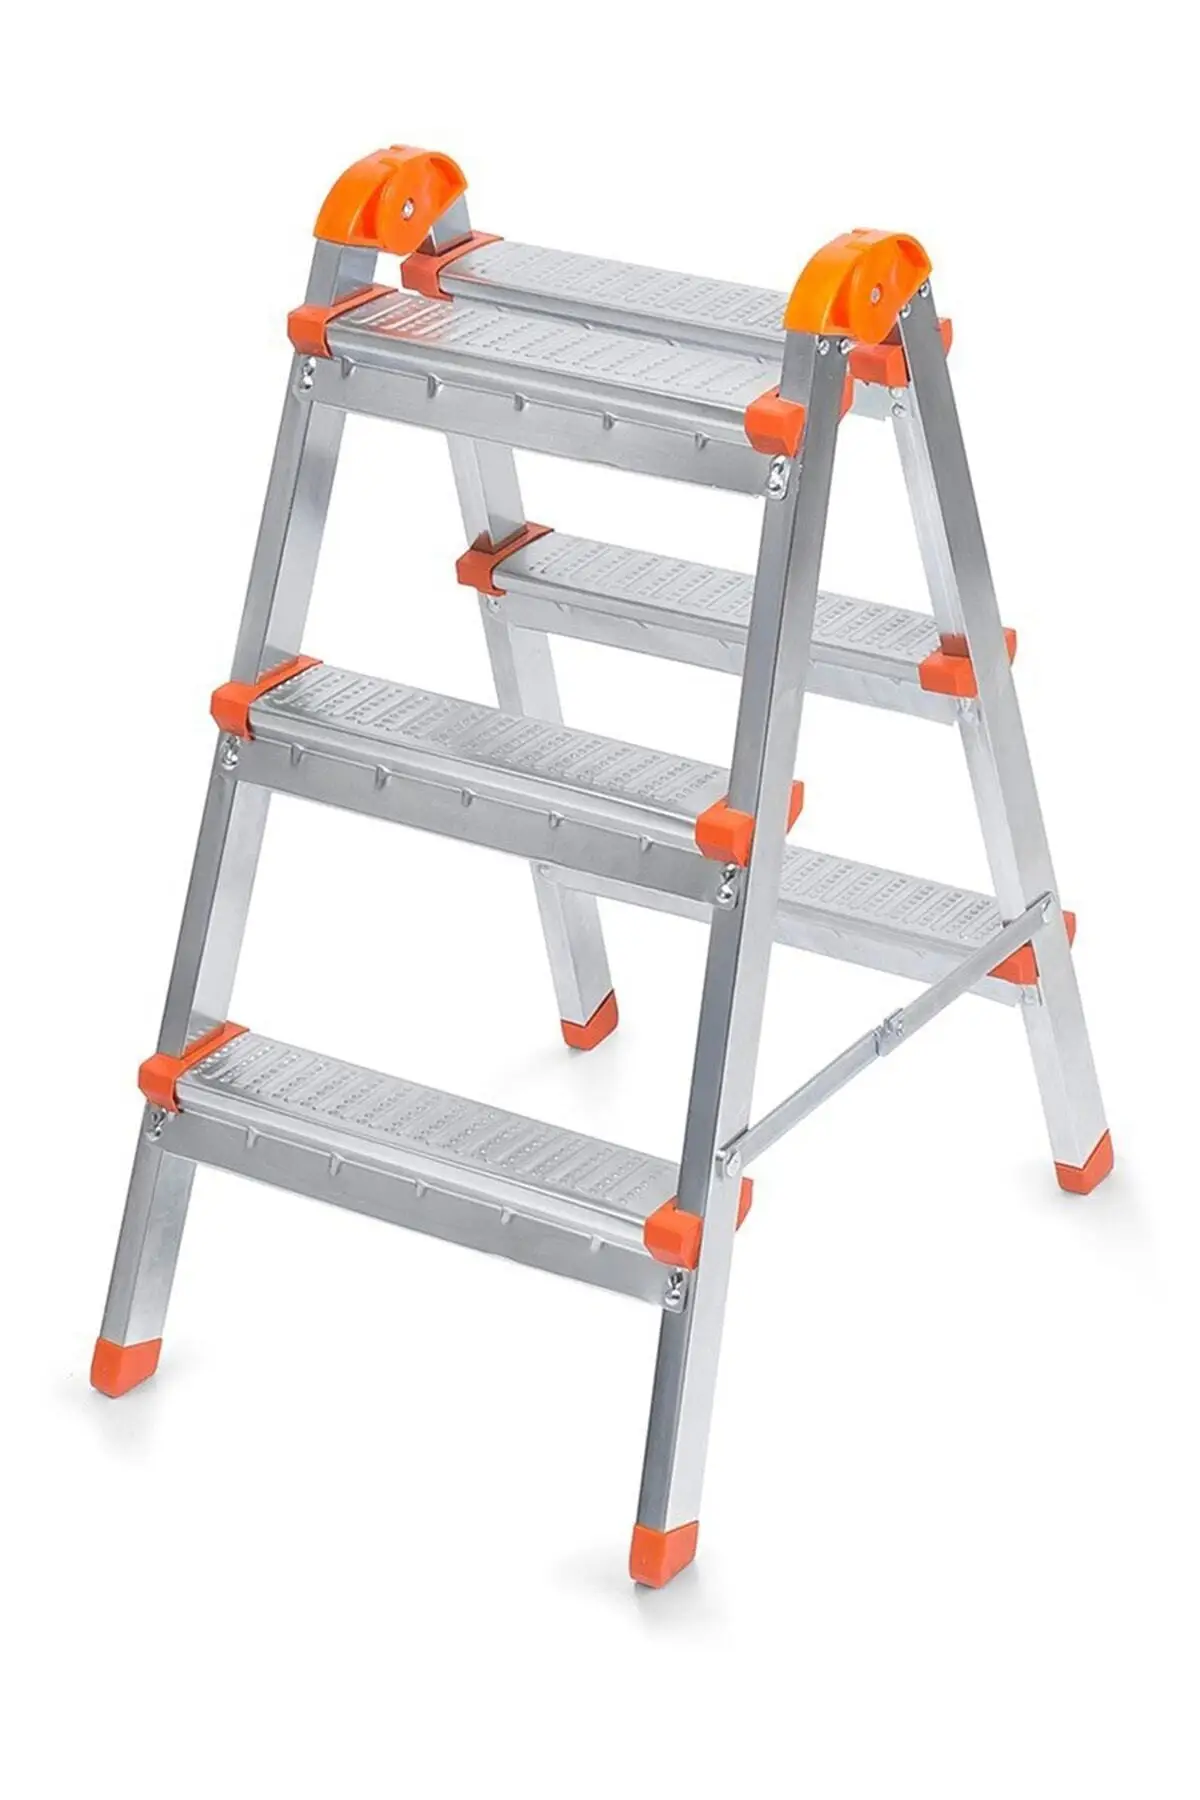 12503 double Output 3 + 3 Metal Ladder